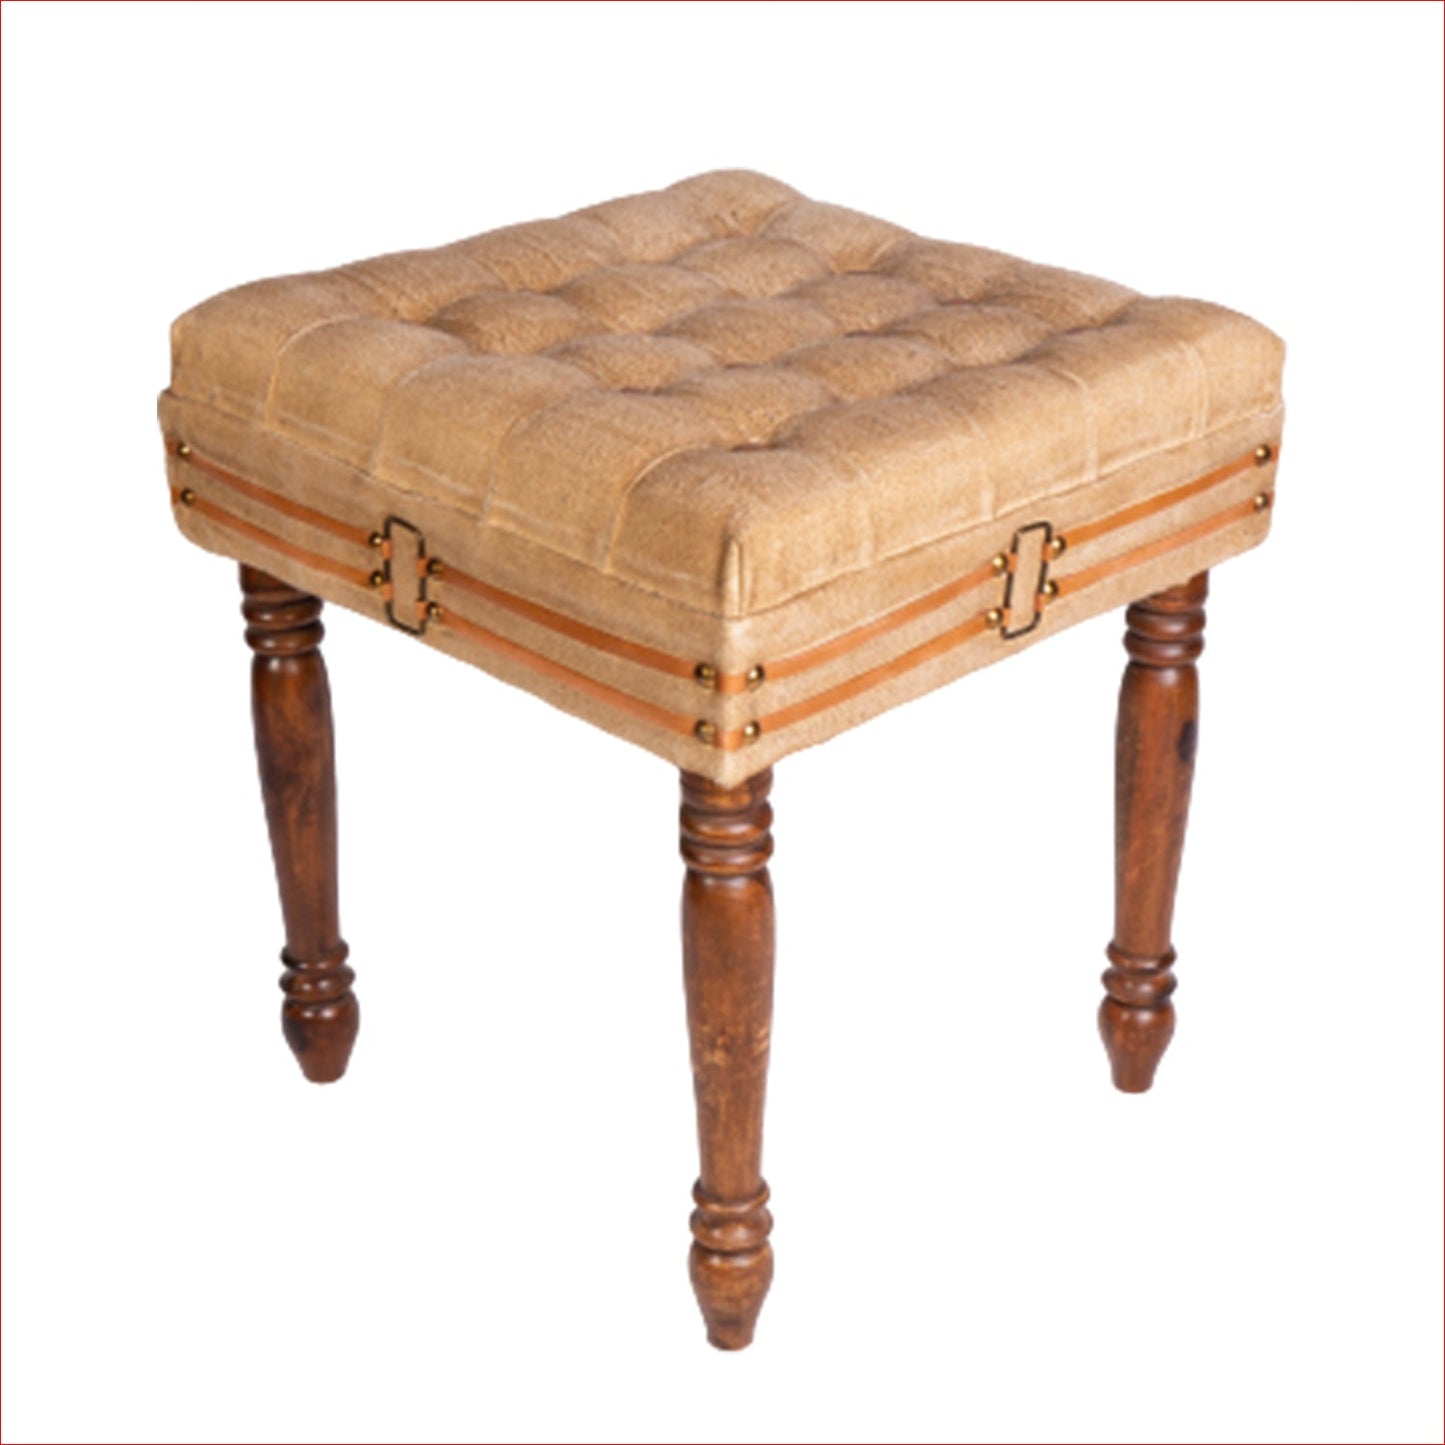 Vintage Style Square Ottoman with Canvas Seat and Wooden Legs - Stylla London